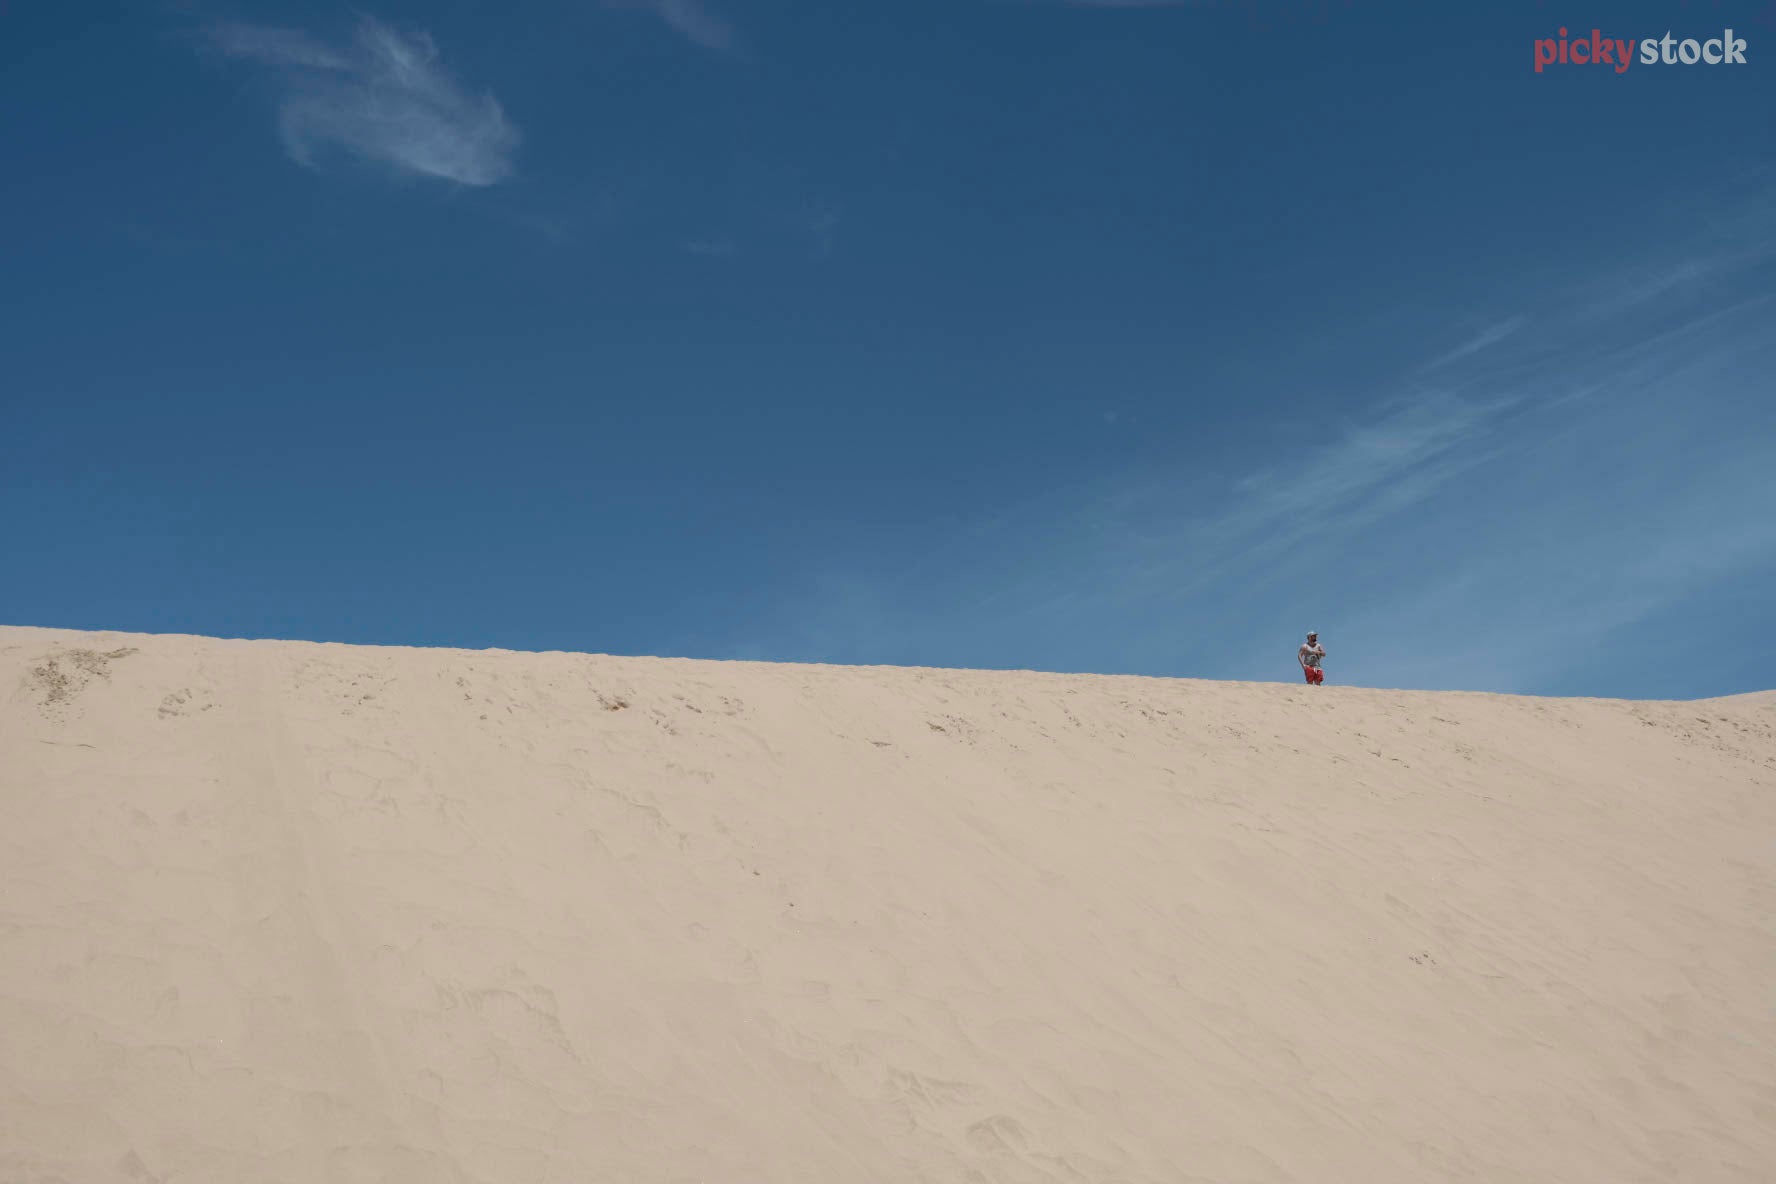 A graphic composition where one giant sanddune cuts across the image from left to right. The bottom half of the image is covered in golden sand. The top half blue skies. 